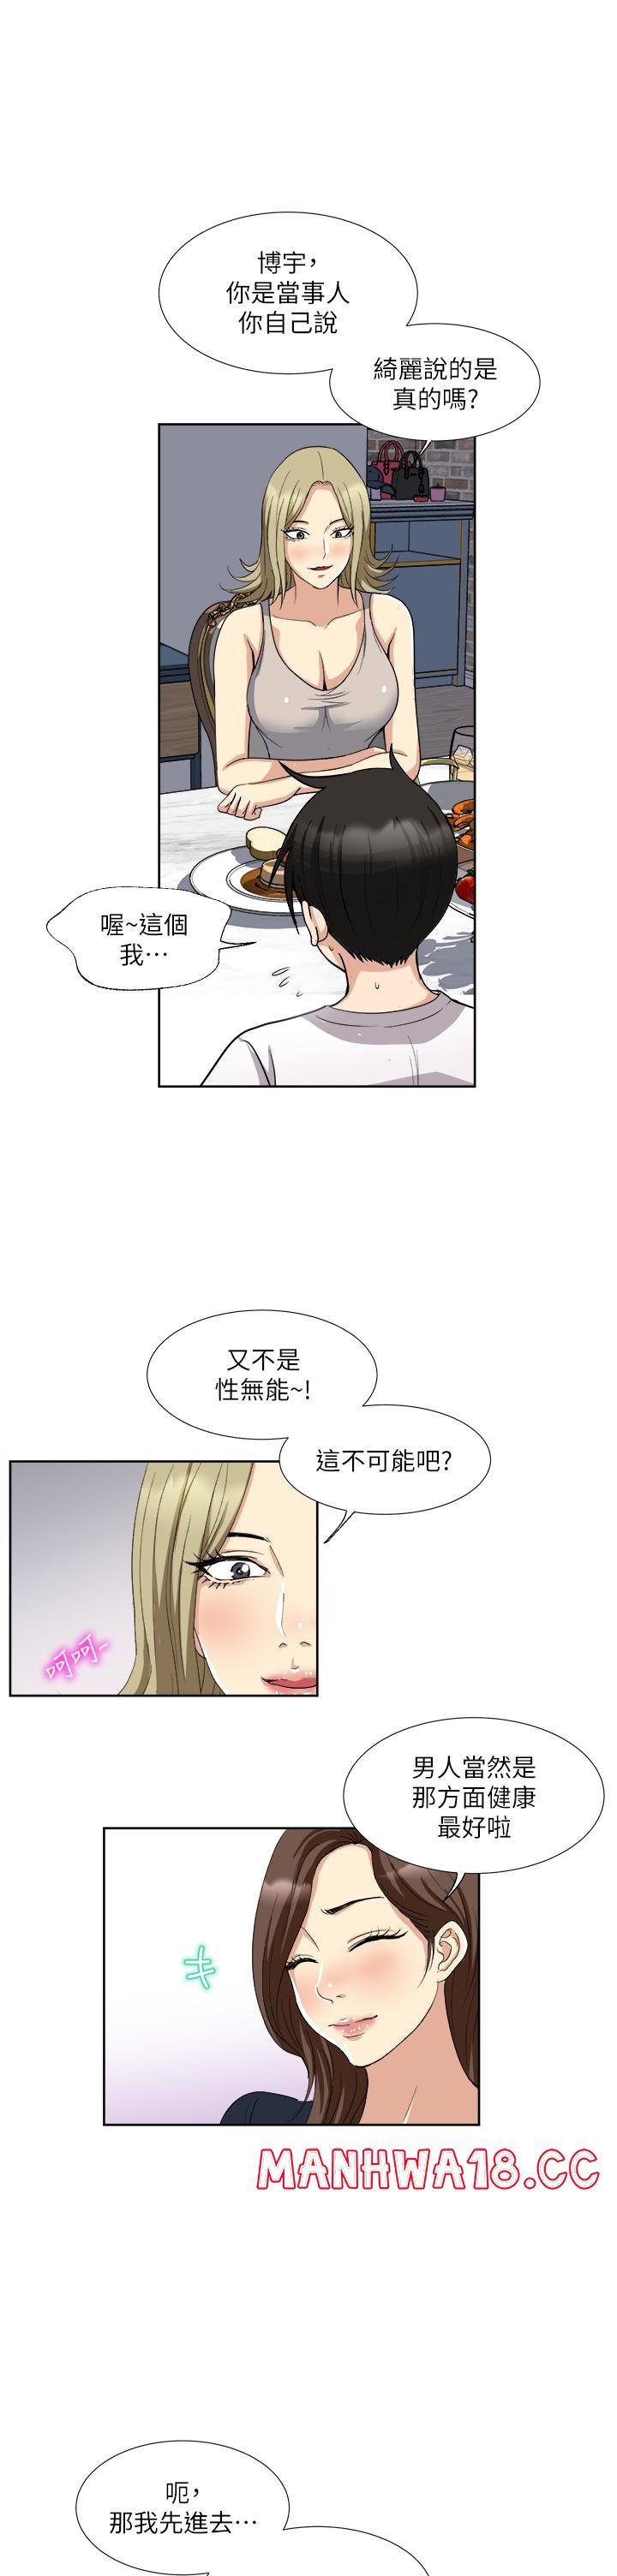 just-once-raw-chap-3-23